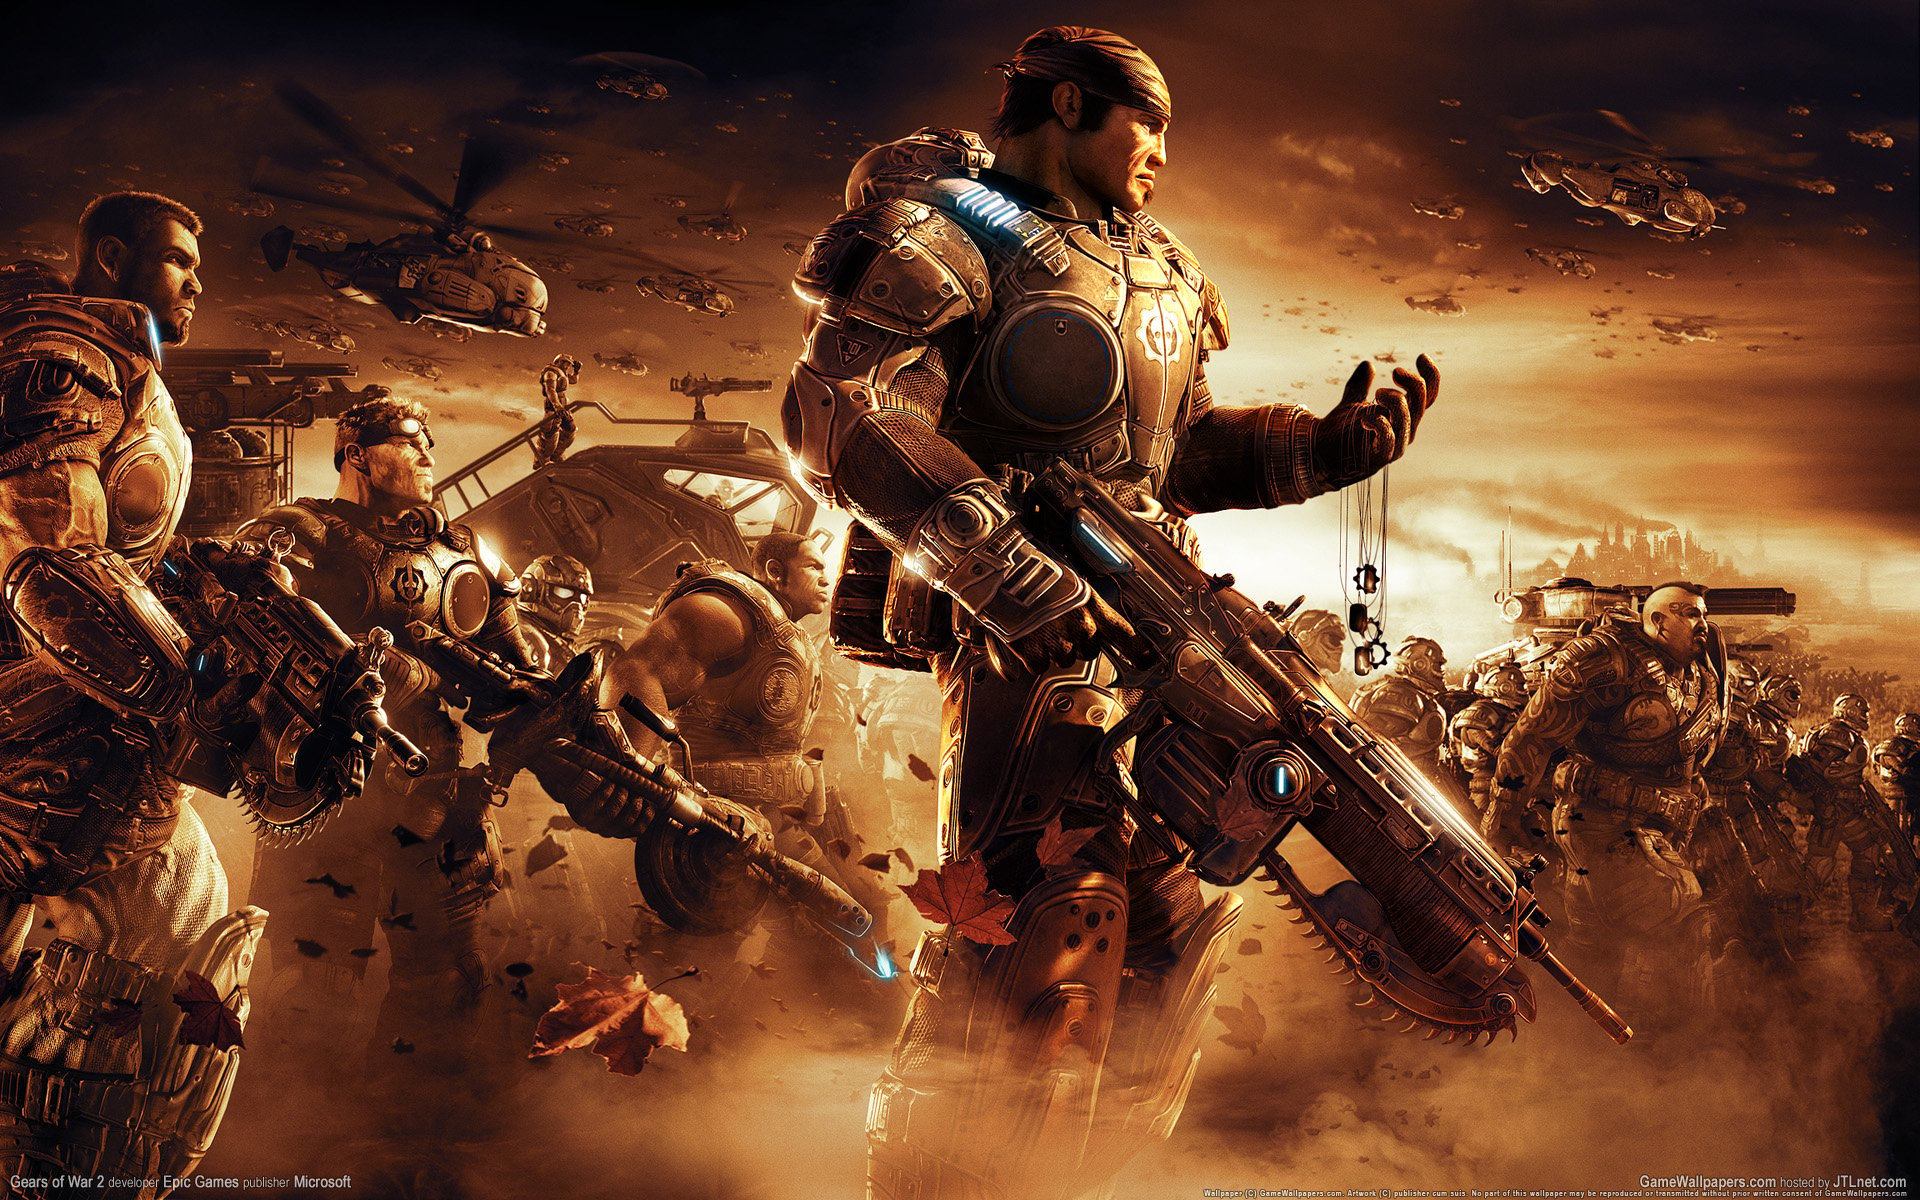 22 Awesome 3D Game Wallpapers Gears of War   Downloads   TechMynd 1920x1200